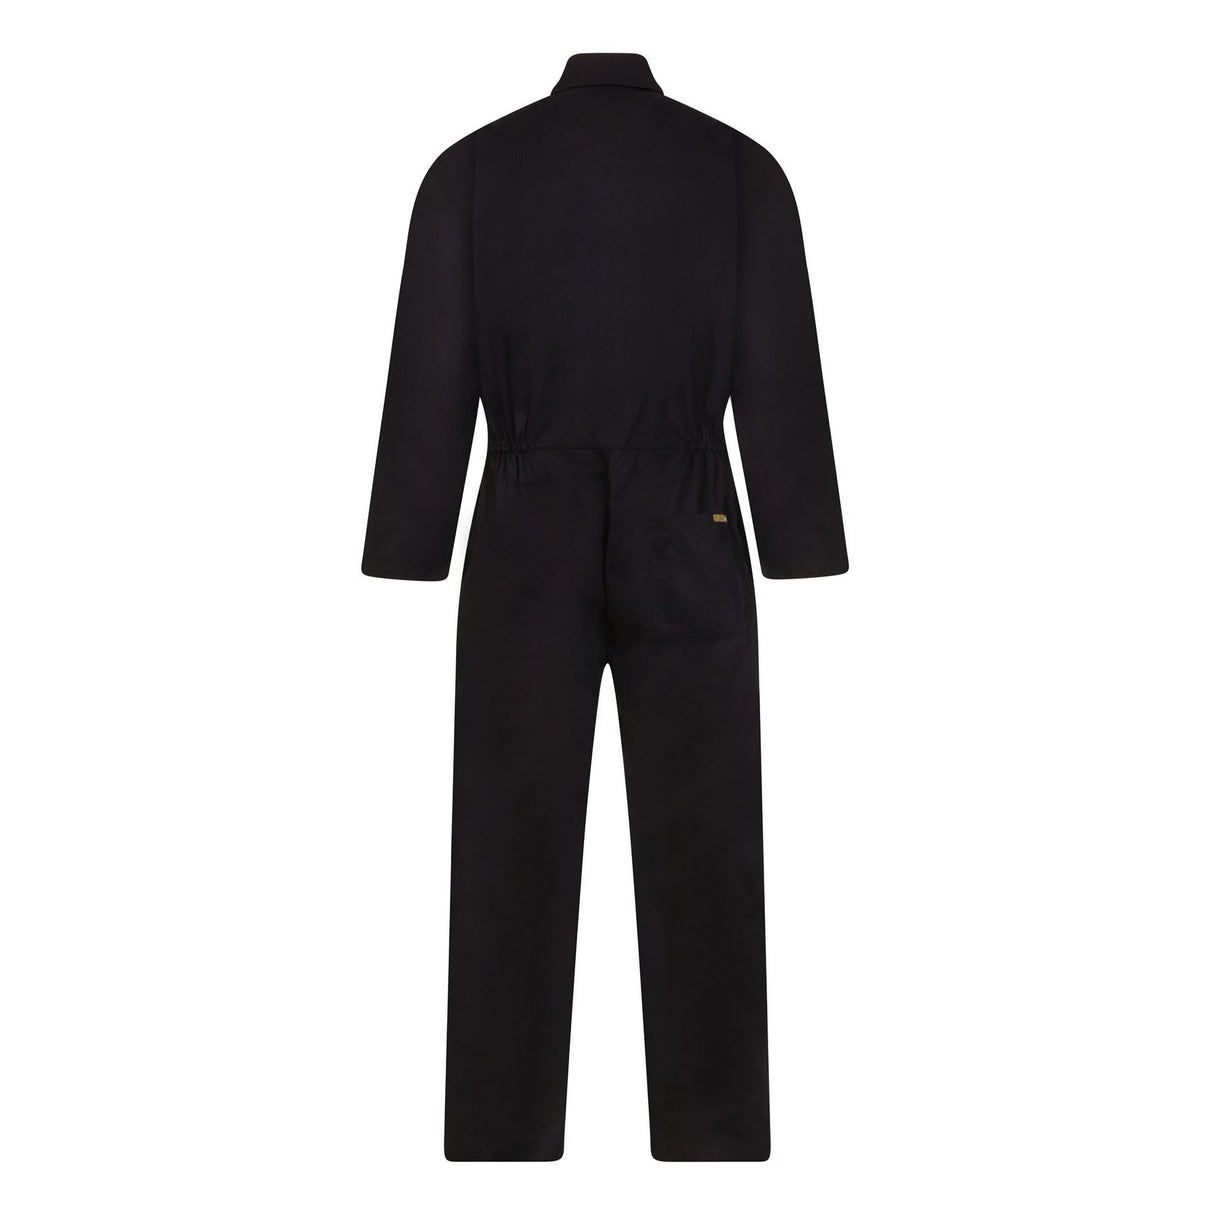 GS Workwear 100% Cotton Coverall